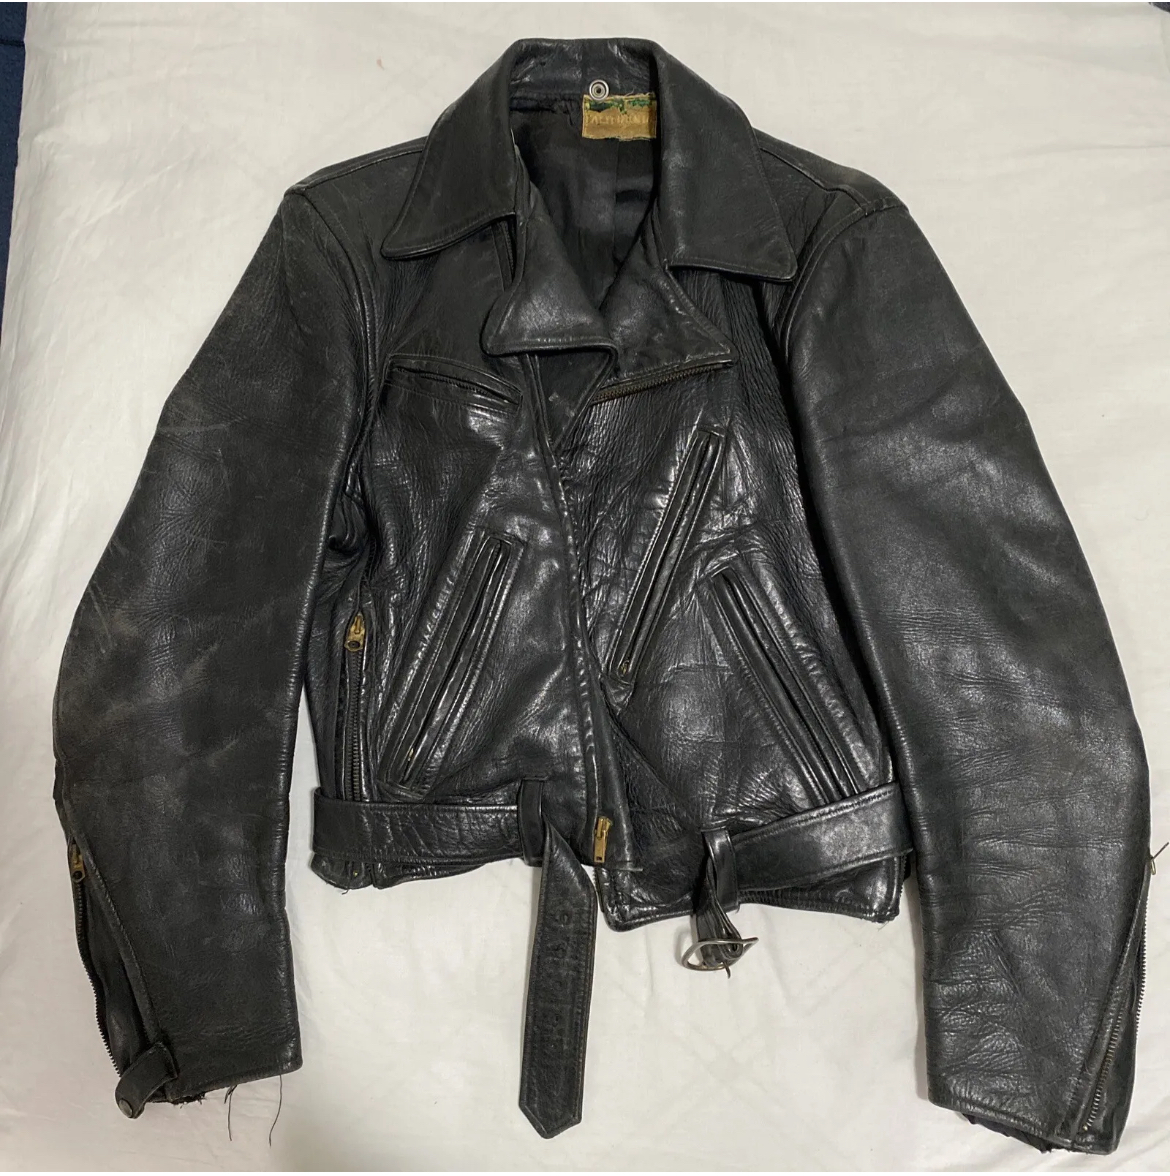 Finds and Deals - Leather Jacket Edition | Page 1141 | The Fedora Lounge